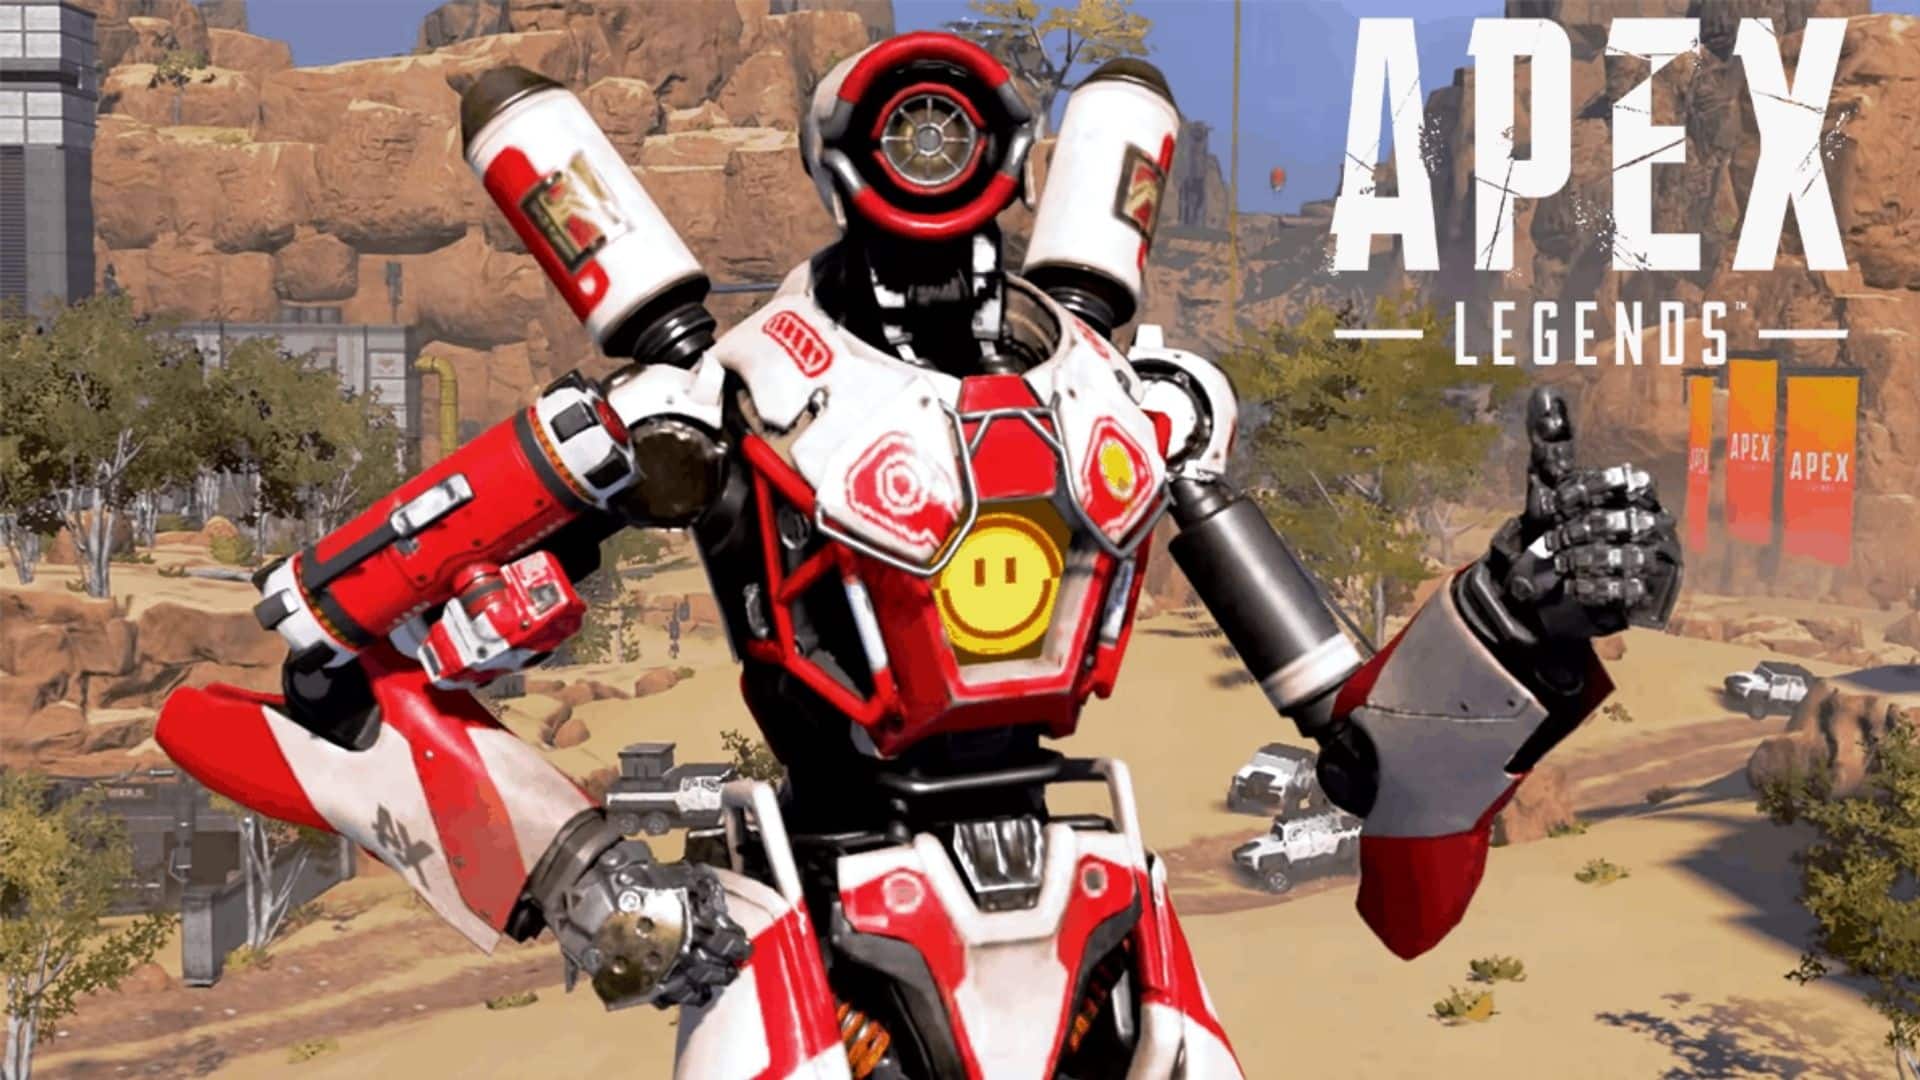 Pathfinder thumbs up with Apex Legends logo